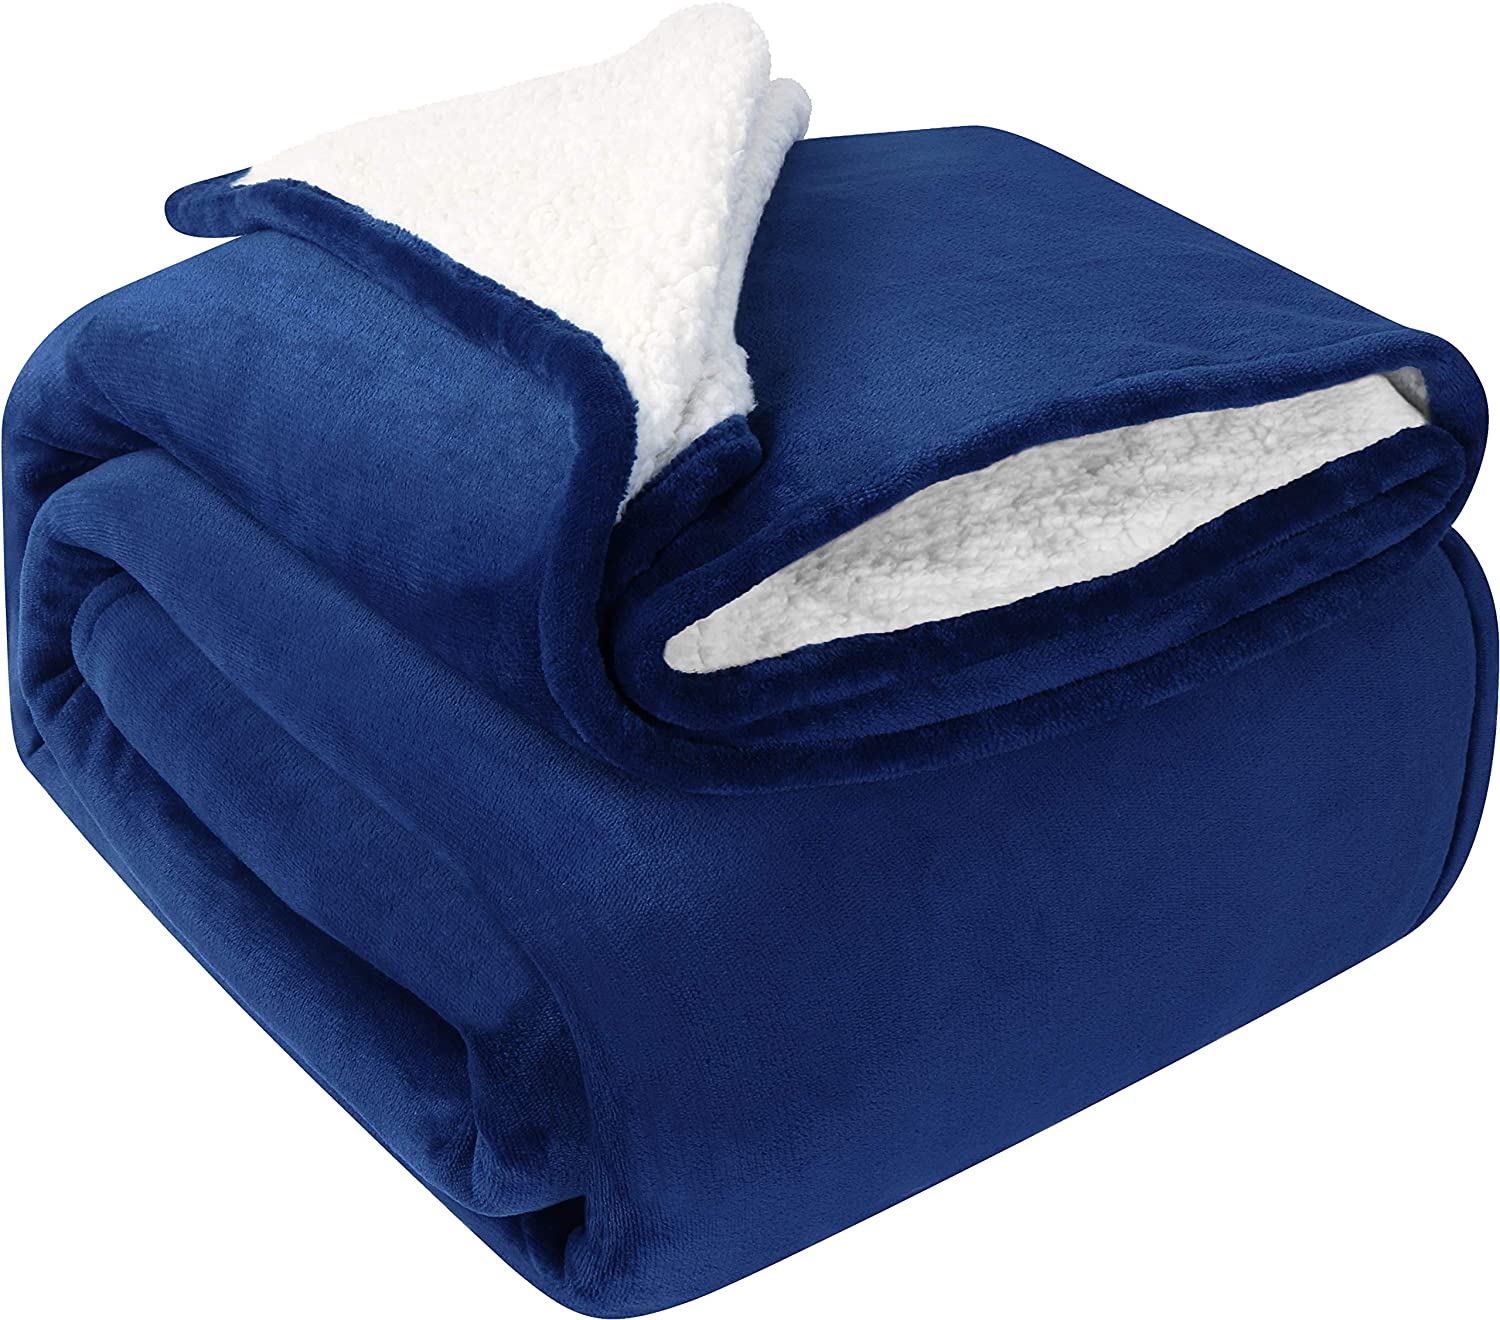 Utopia Bedding Sherpa Blanket King Size [Washed Blue, 90x102 Inches] -  480GSM Thick Warm Plush Fleece Reversible Blanket for Bed, Sofa, Couch,  Camping